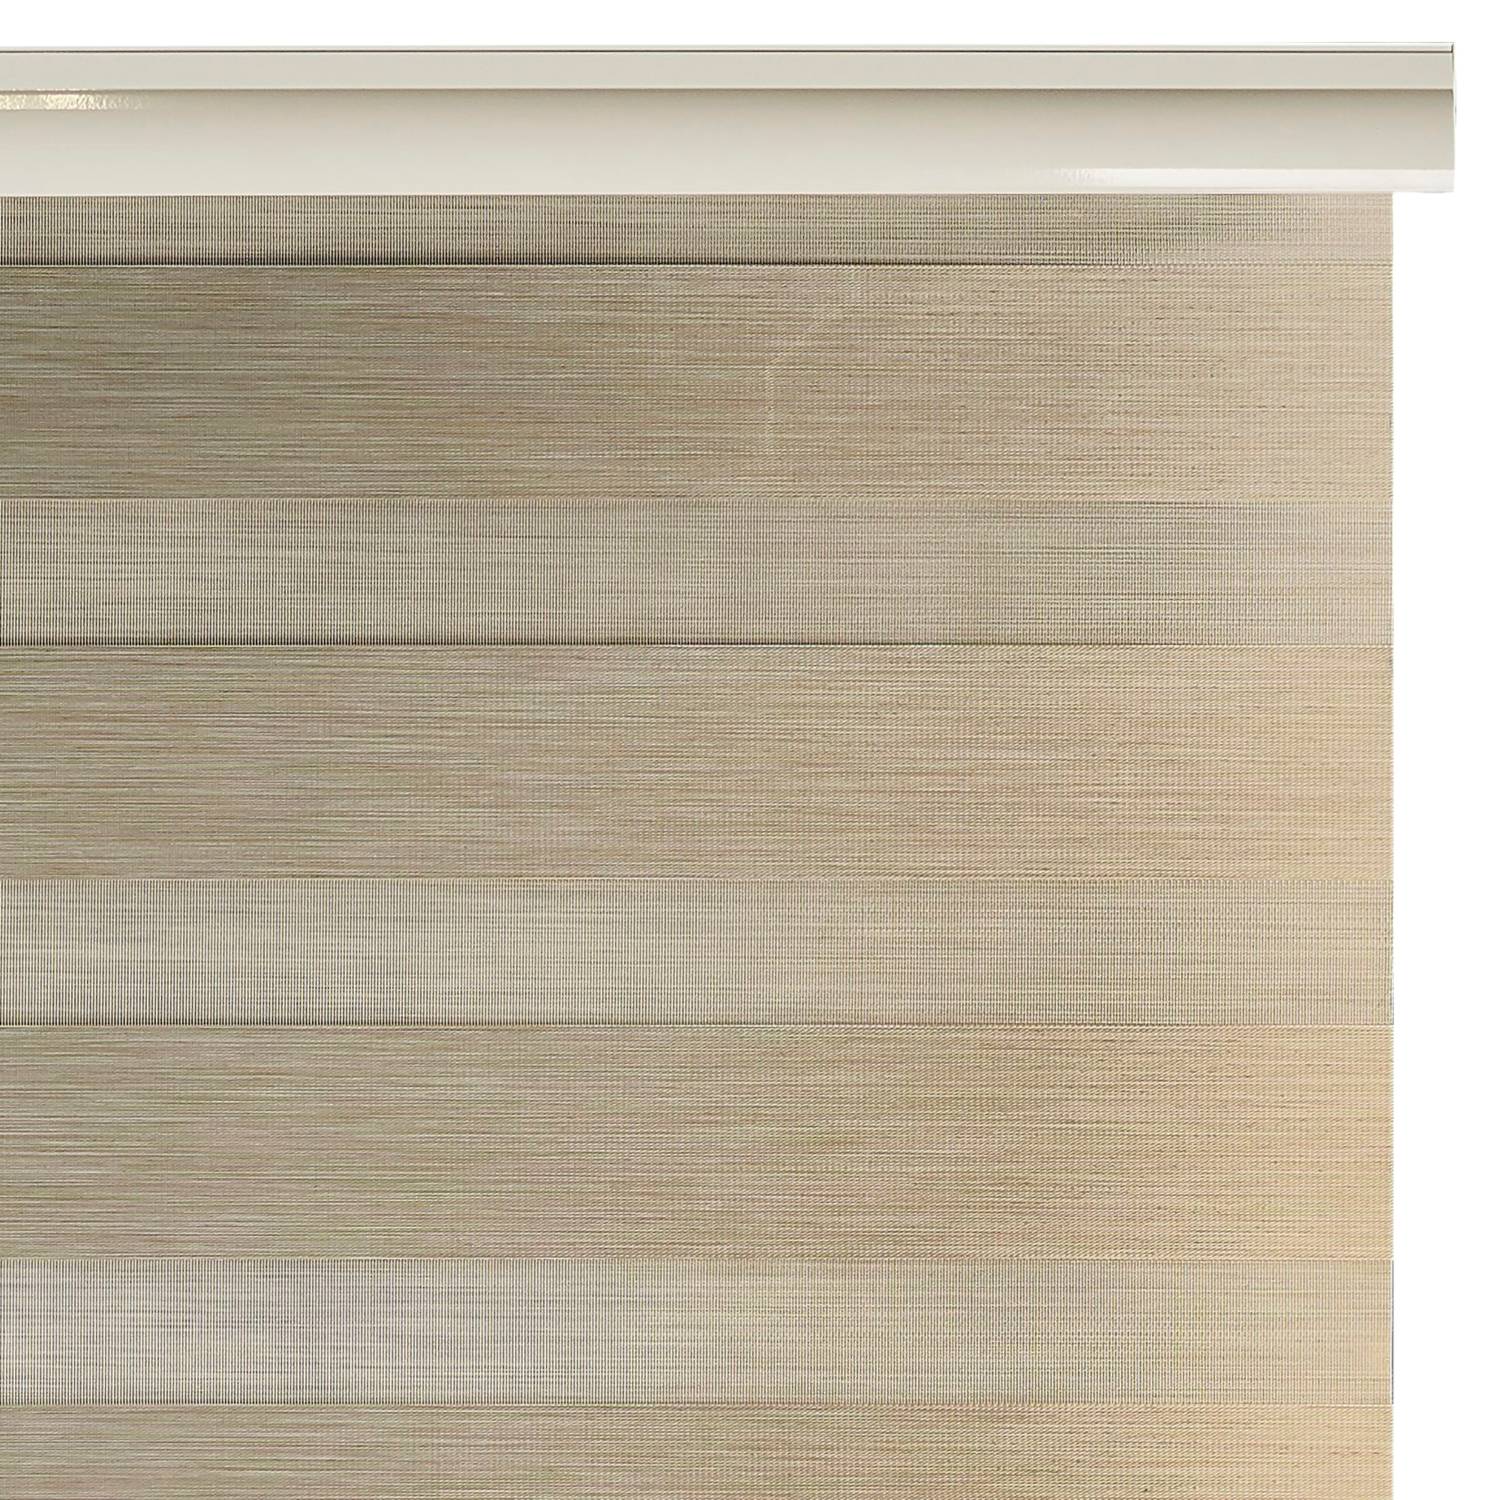 Cortina Enrollable Black Out 180x250cm Beige